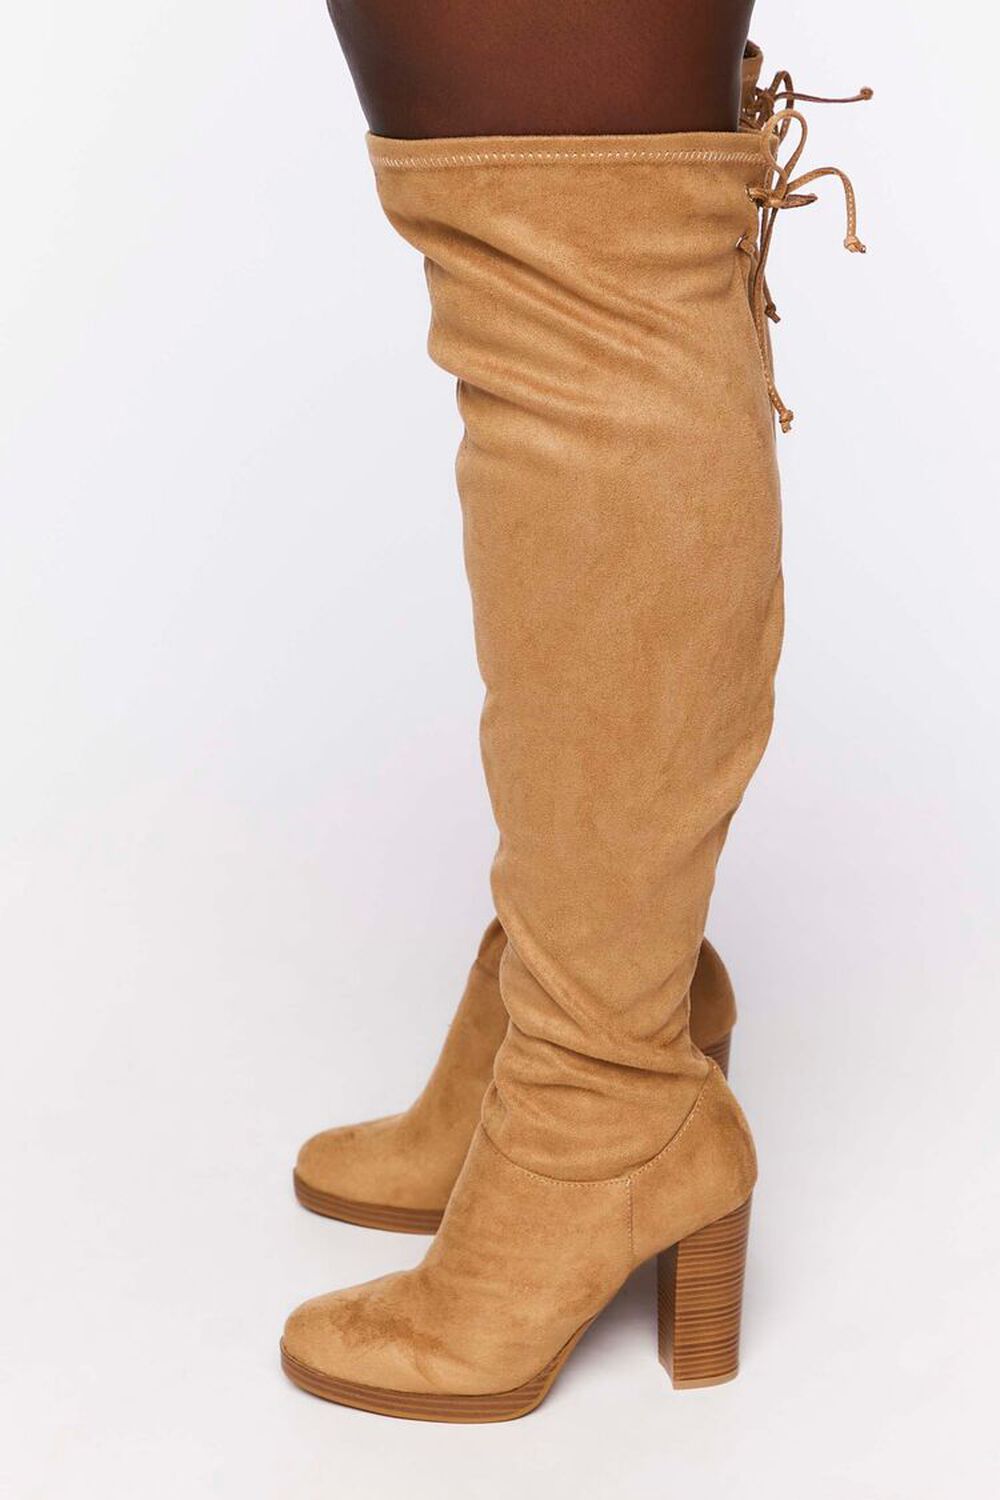 TAN Faux Suede Over-the-Knee Boots (Wide), image 2